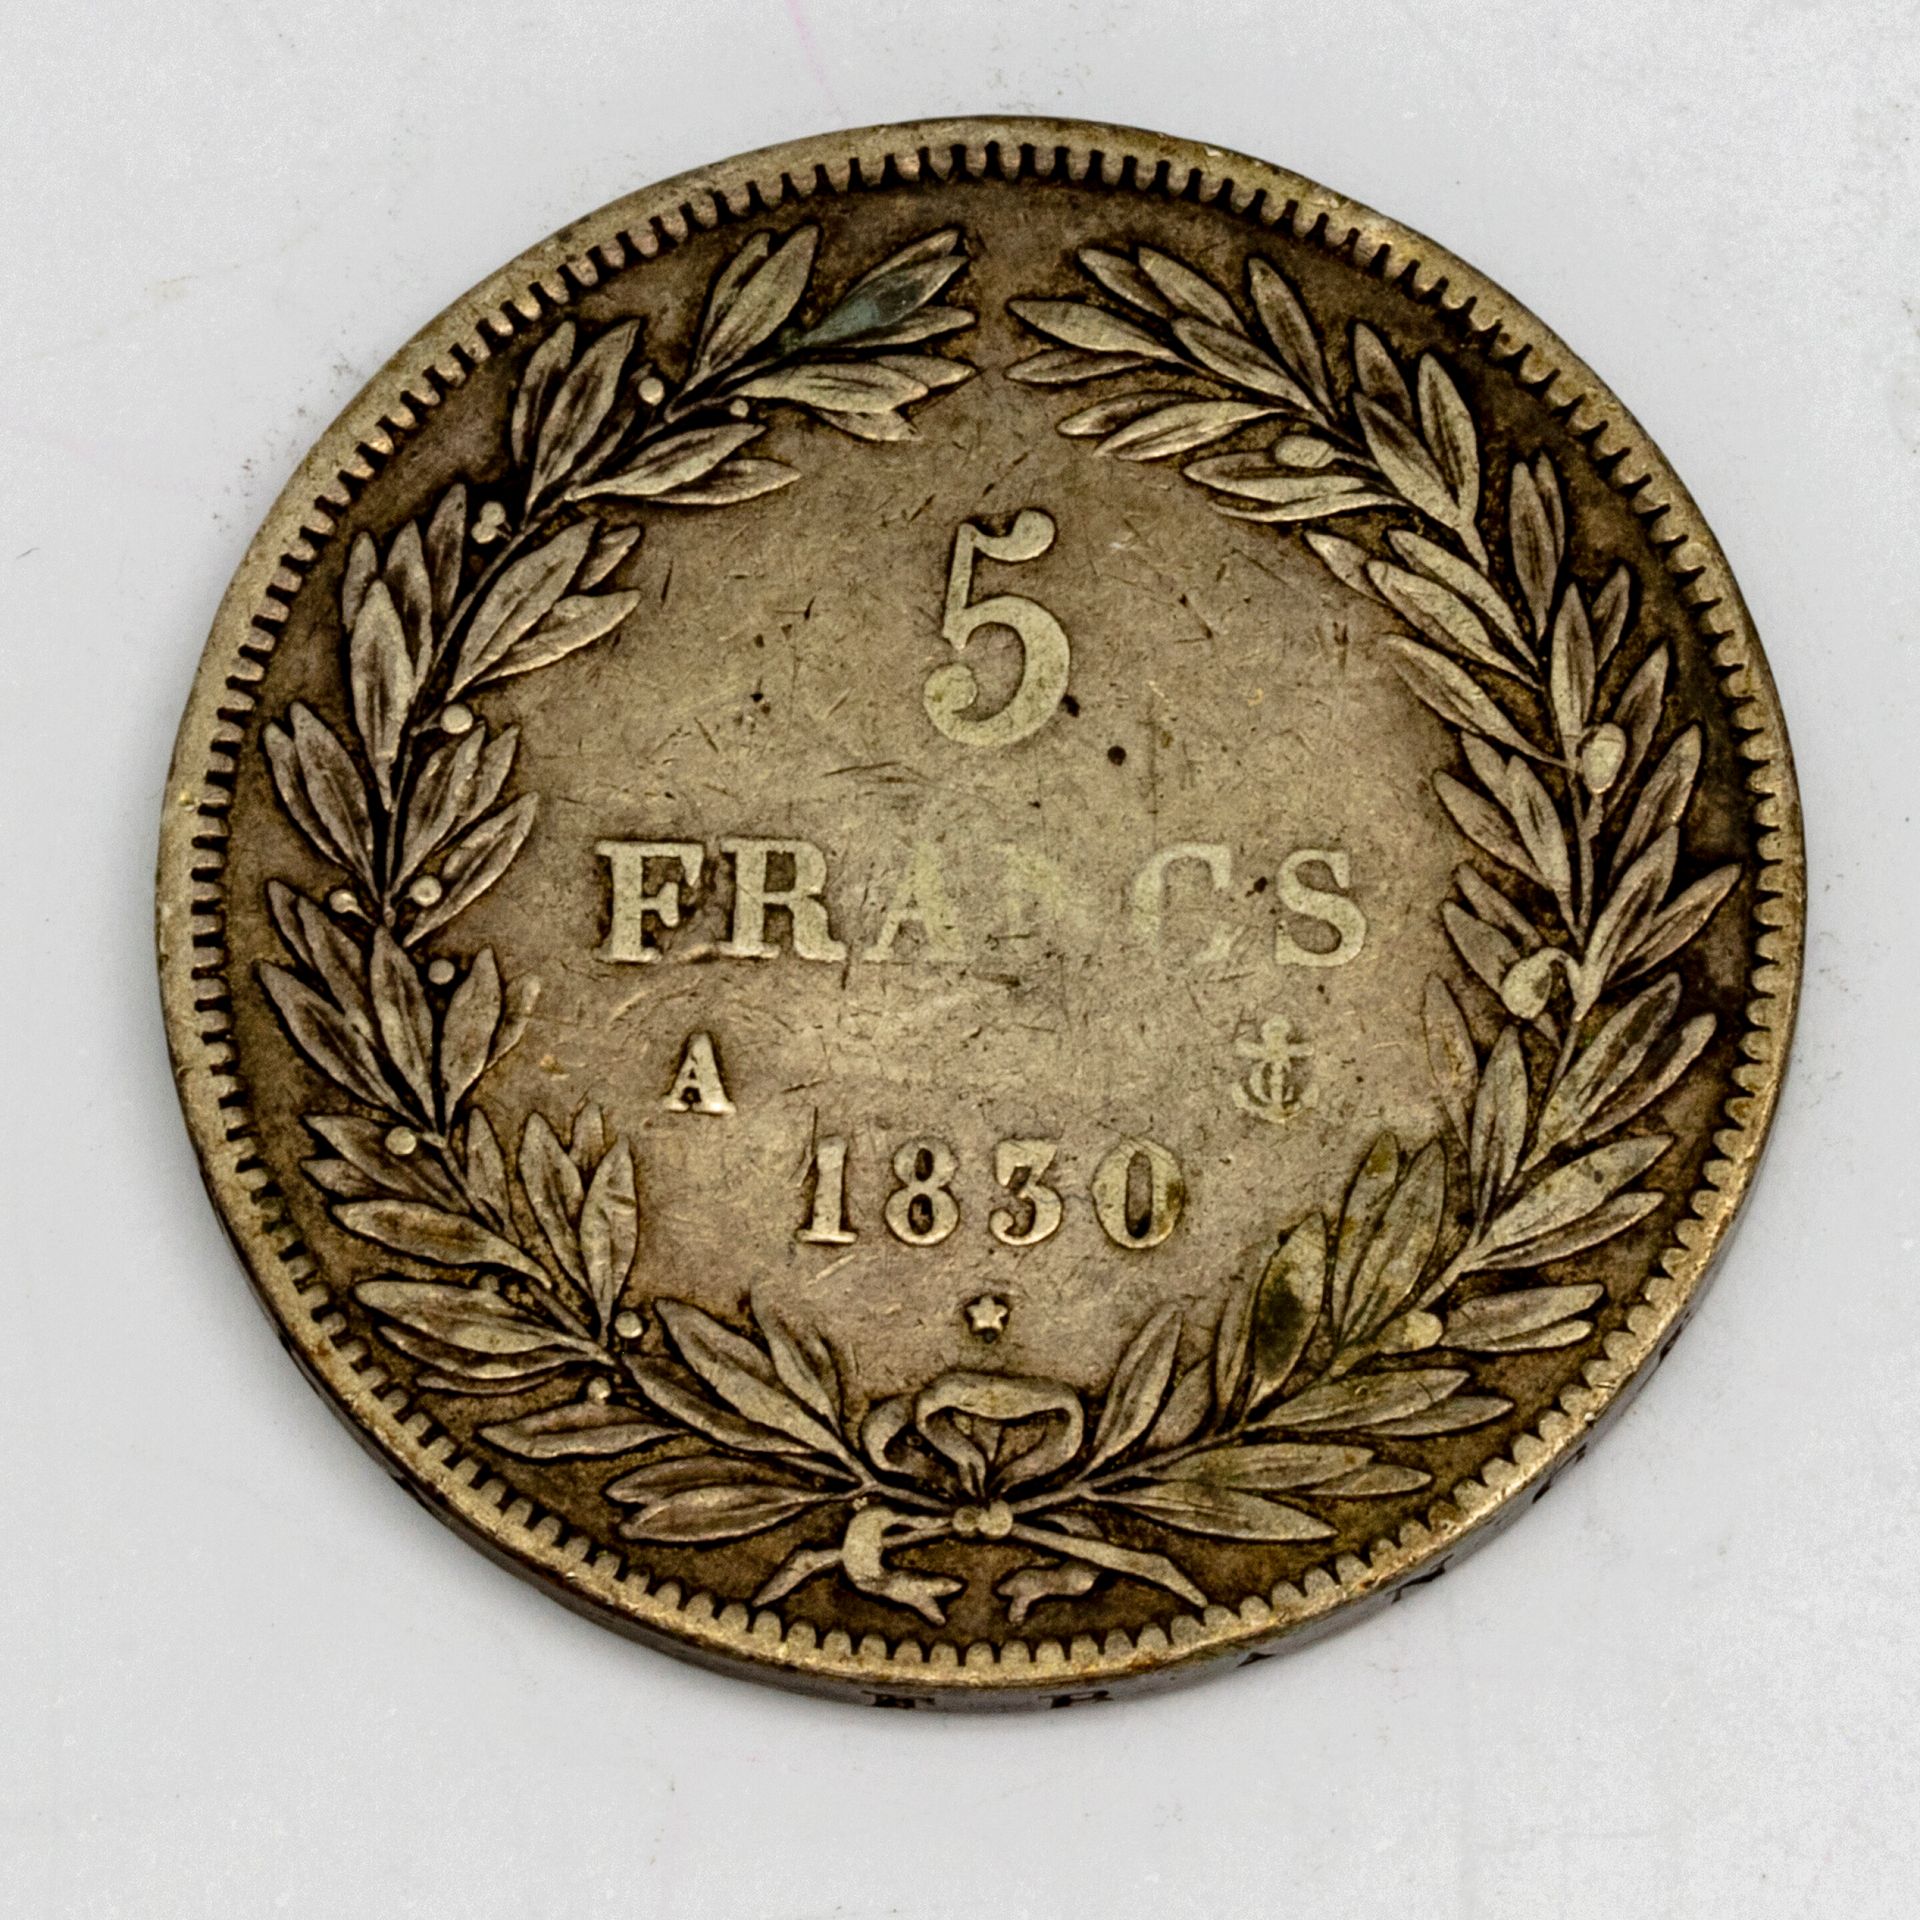 Null A 5 francs Louis Philippe 1830 coin
weight : 24,7 g